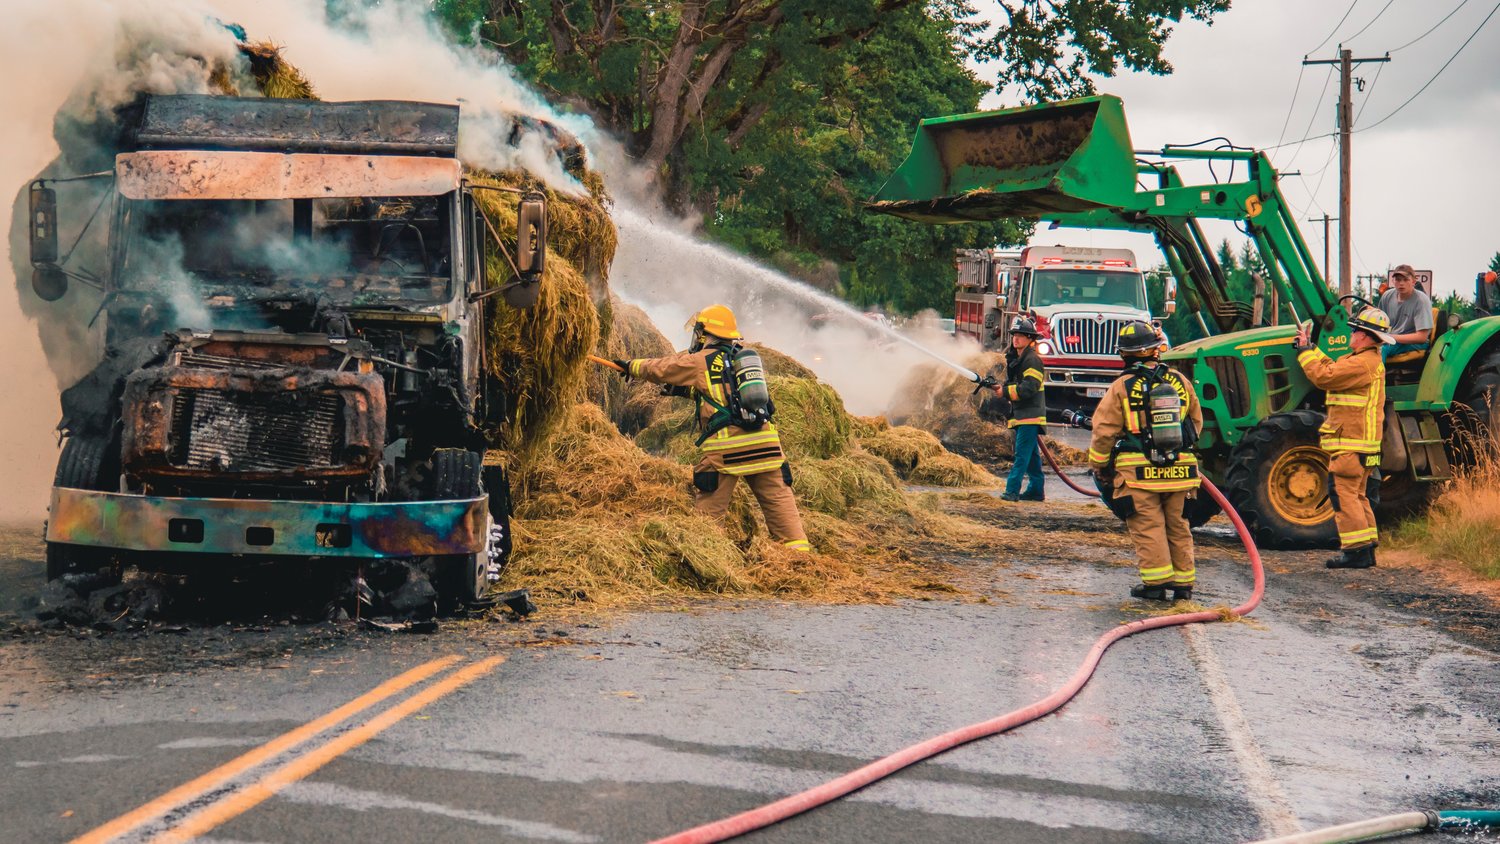 Highway 603 was closed Saturday afternoon when a truck hauling hay caught fire. Lewis County Fire District 6 was the primary responder to the blaze, which occurred near the intersection of Tune Road. No injuries were reported.